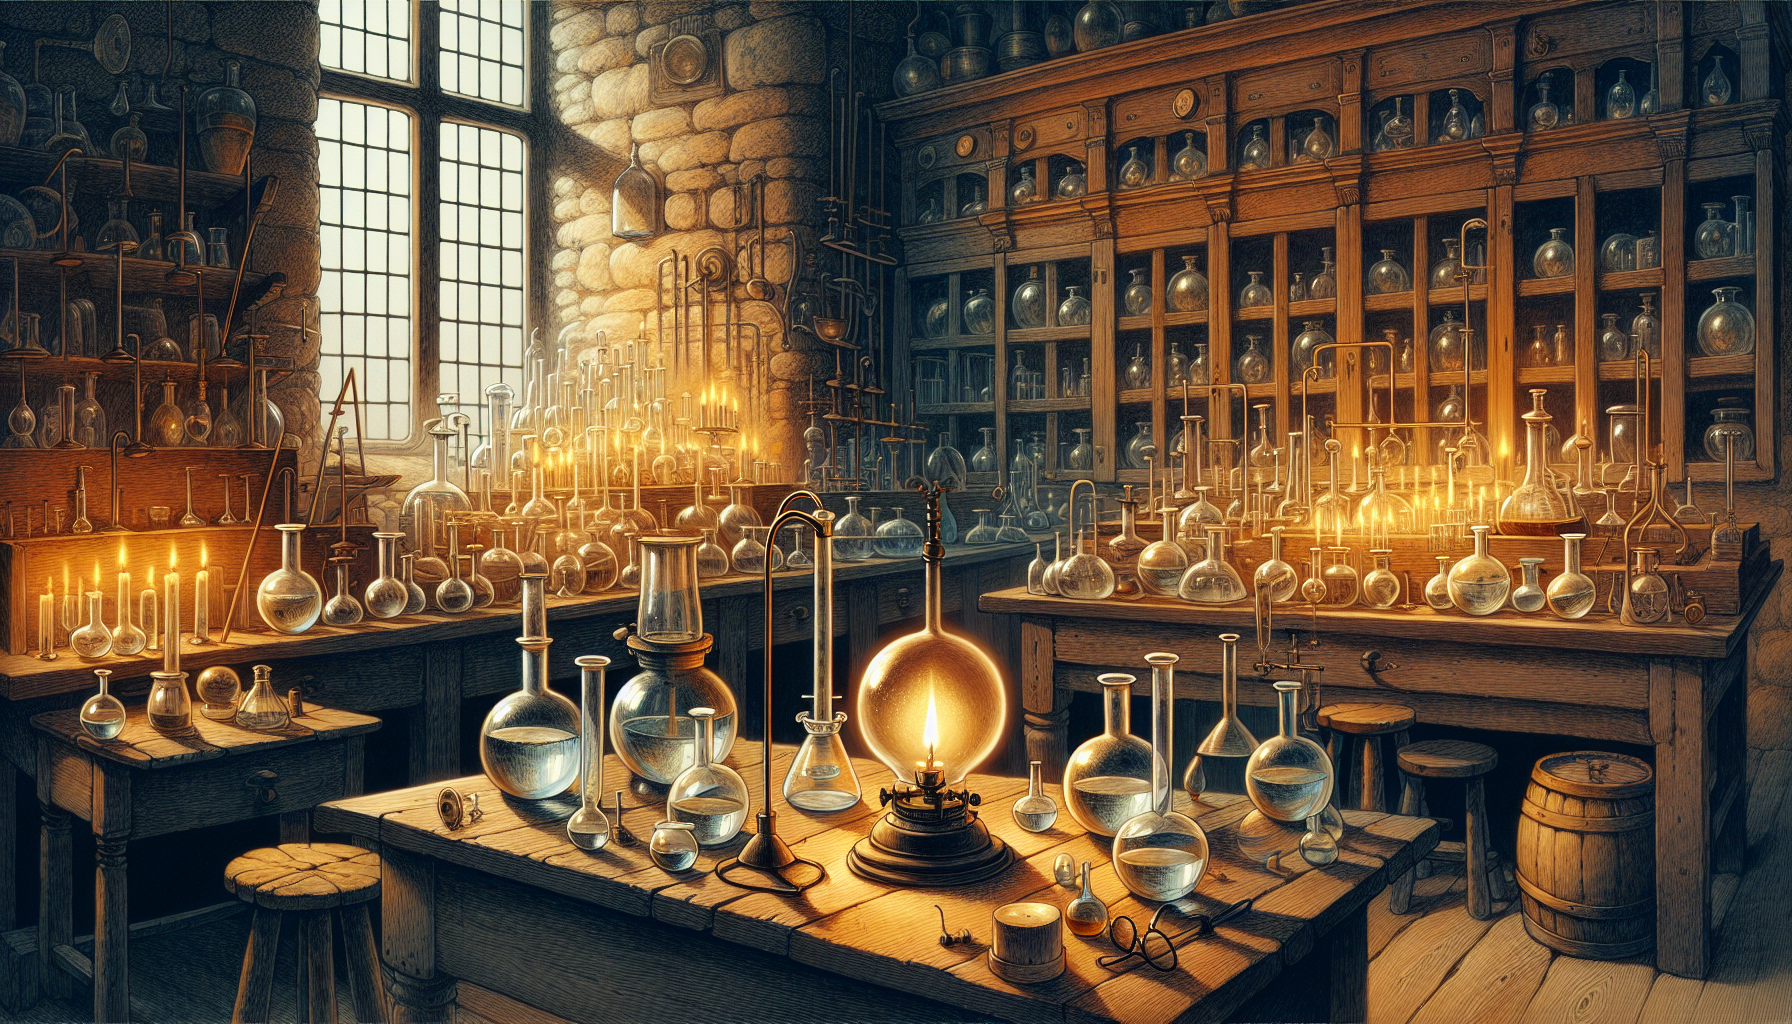 Illustration of a historical laboratory with scientific equipment and glassware